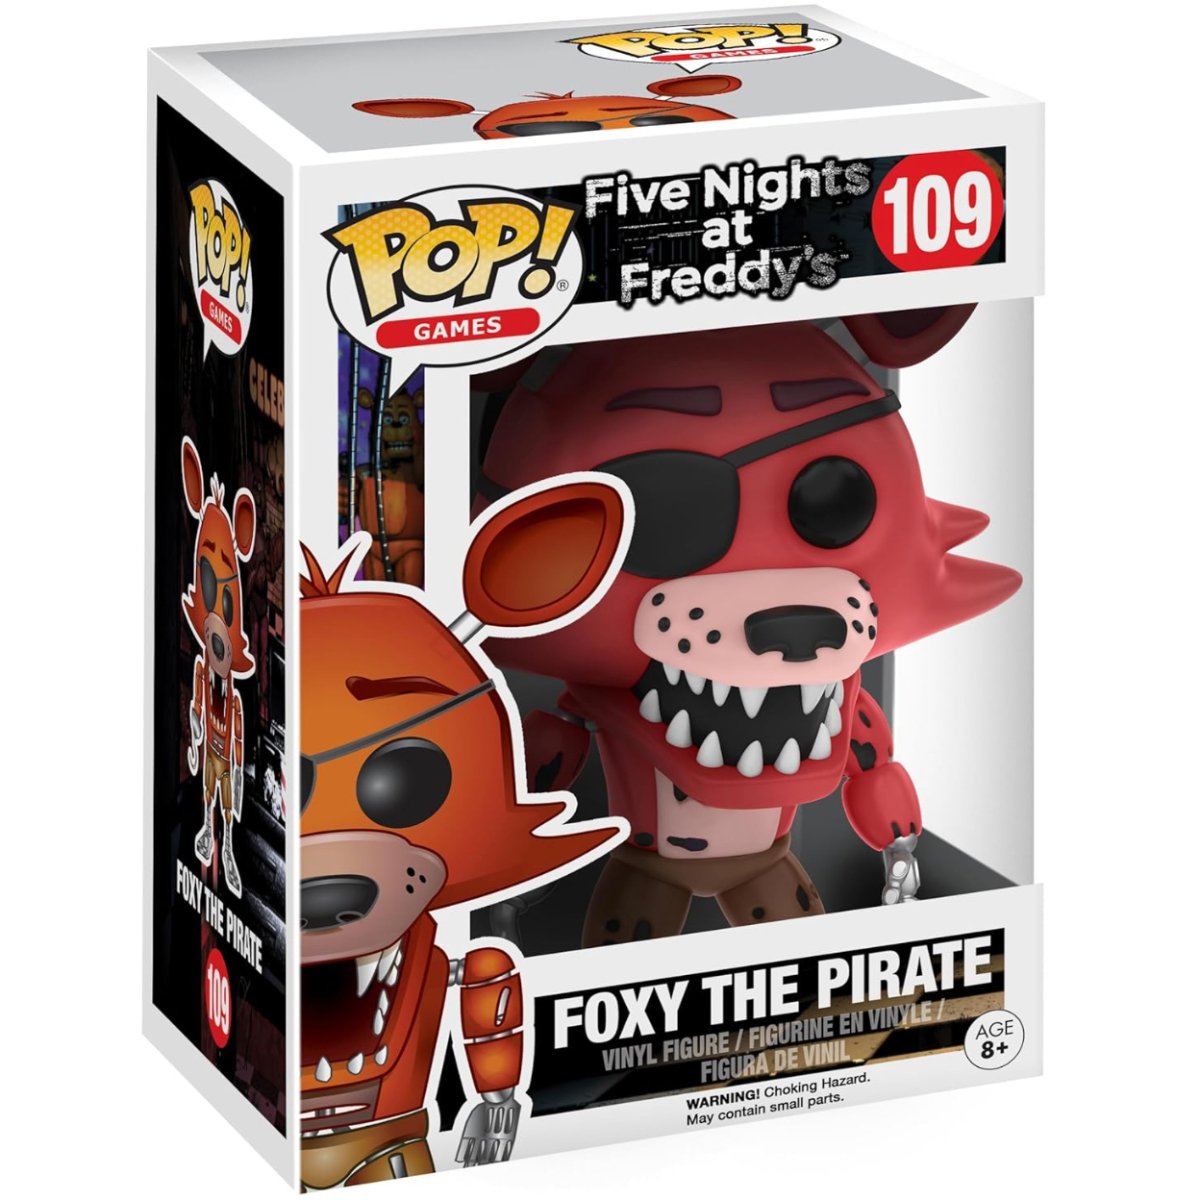 Five Nights at Freddy's - Foxy the Pirate #109 - Funko Pop! Vinyl Games - Persona Toys